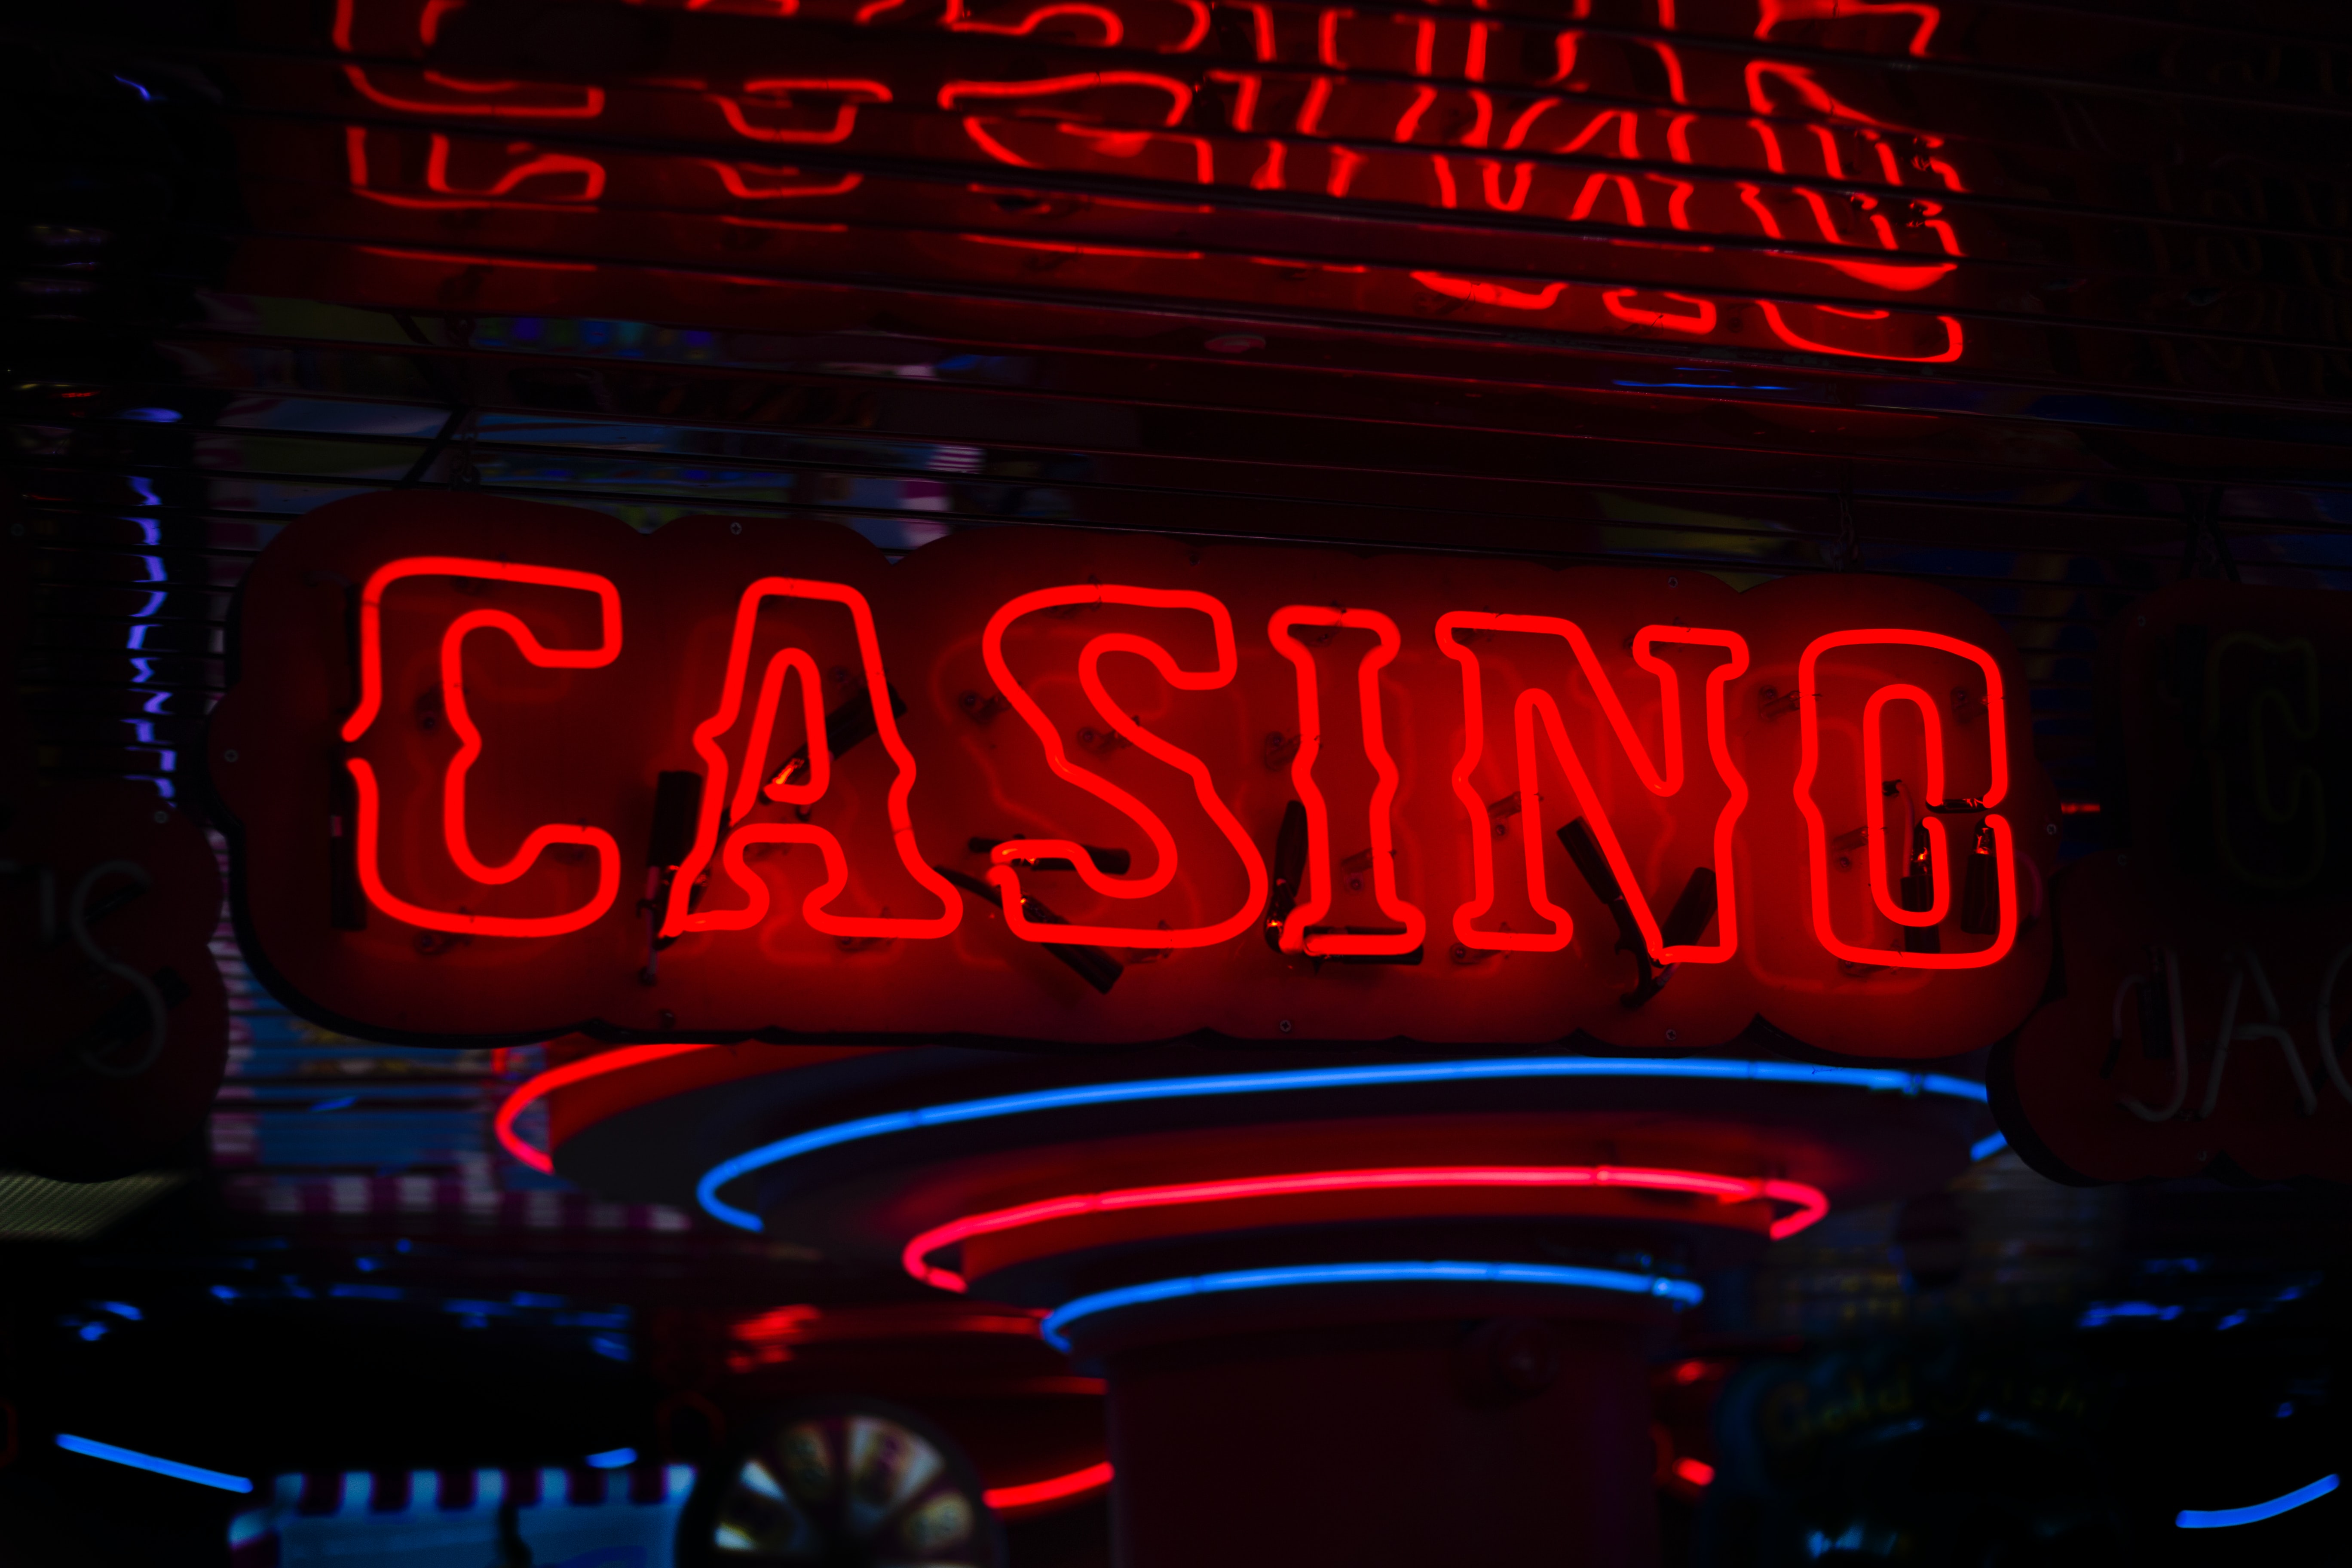 100,000+ Super Casino Poker Sports Gambling related Backlink in your Homepage with high DA/PA